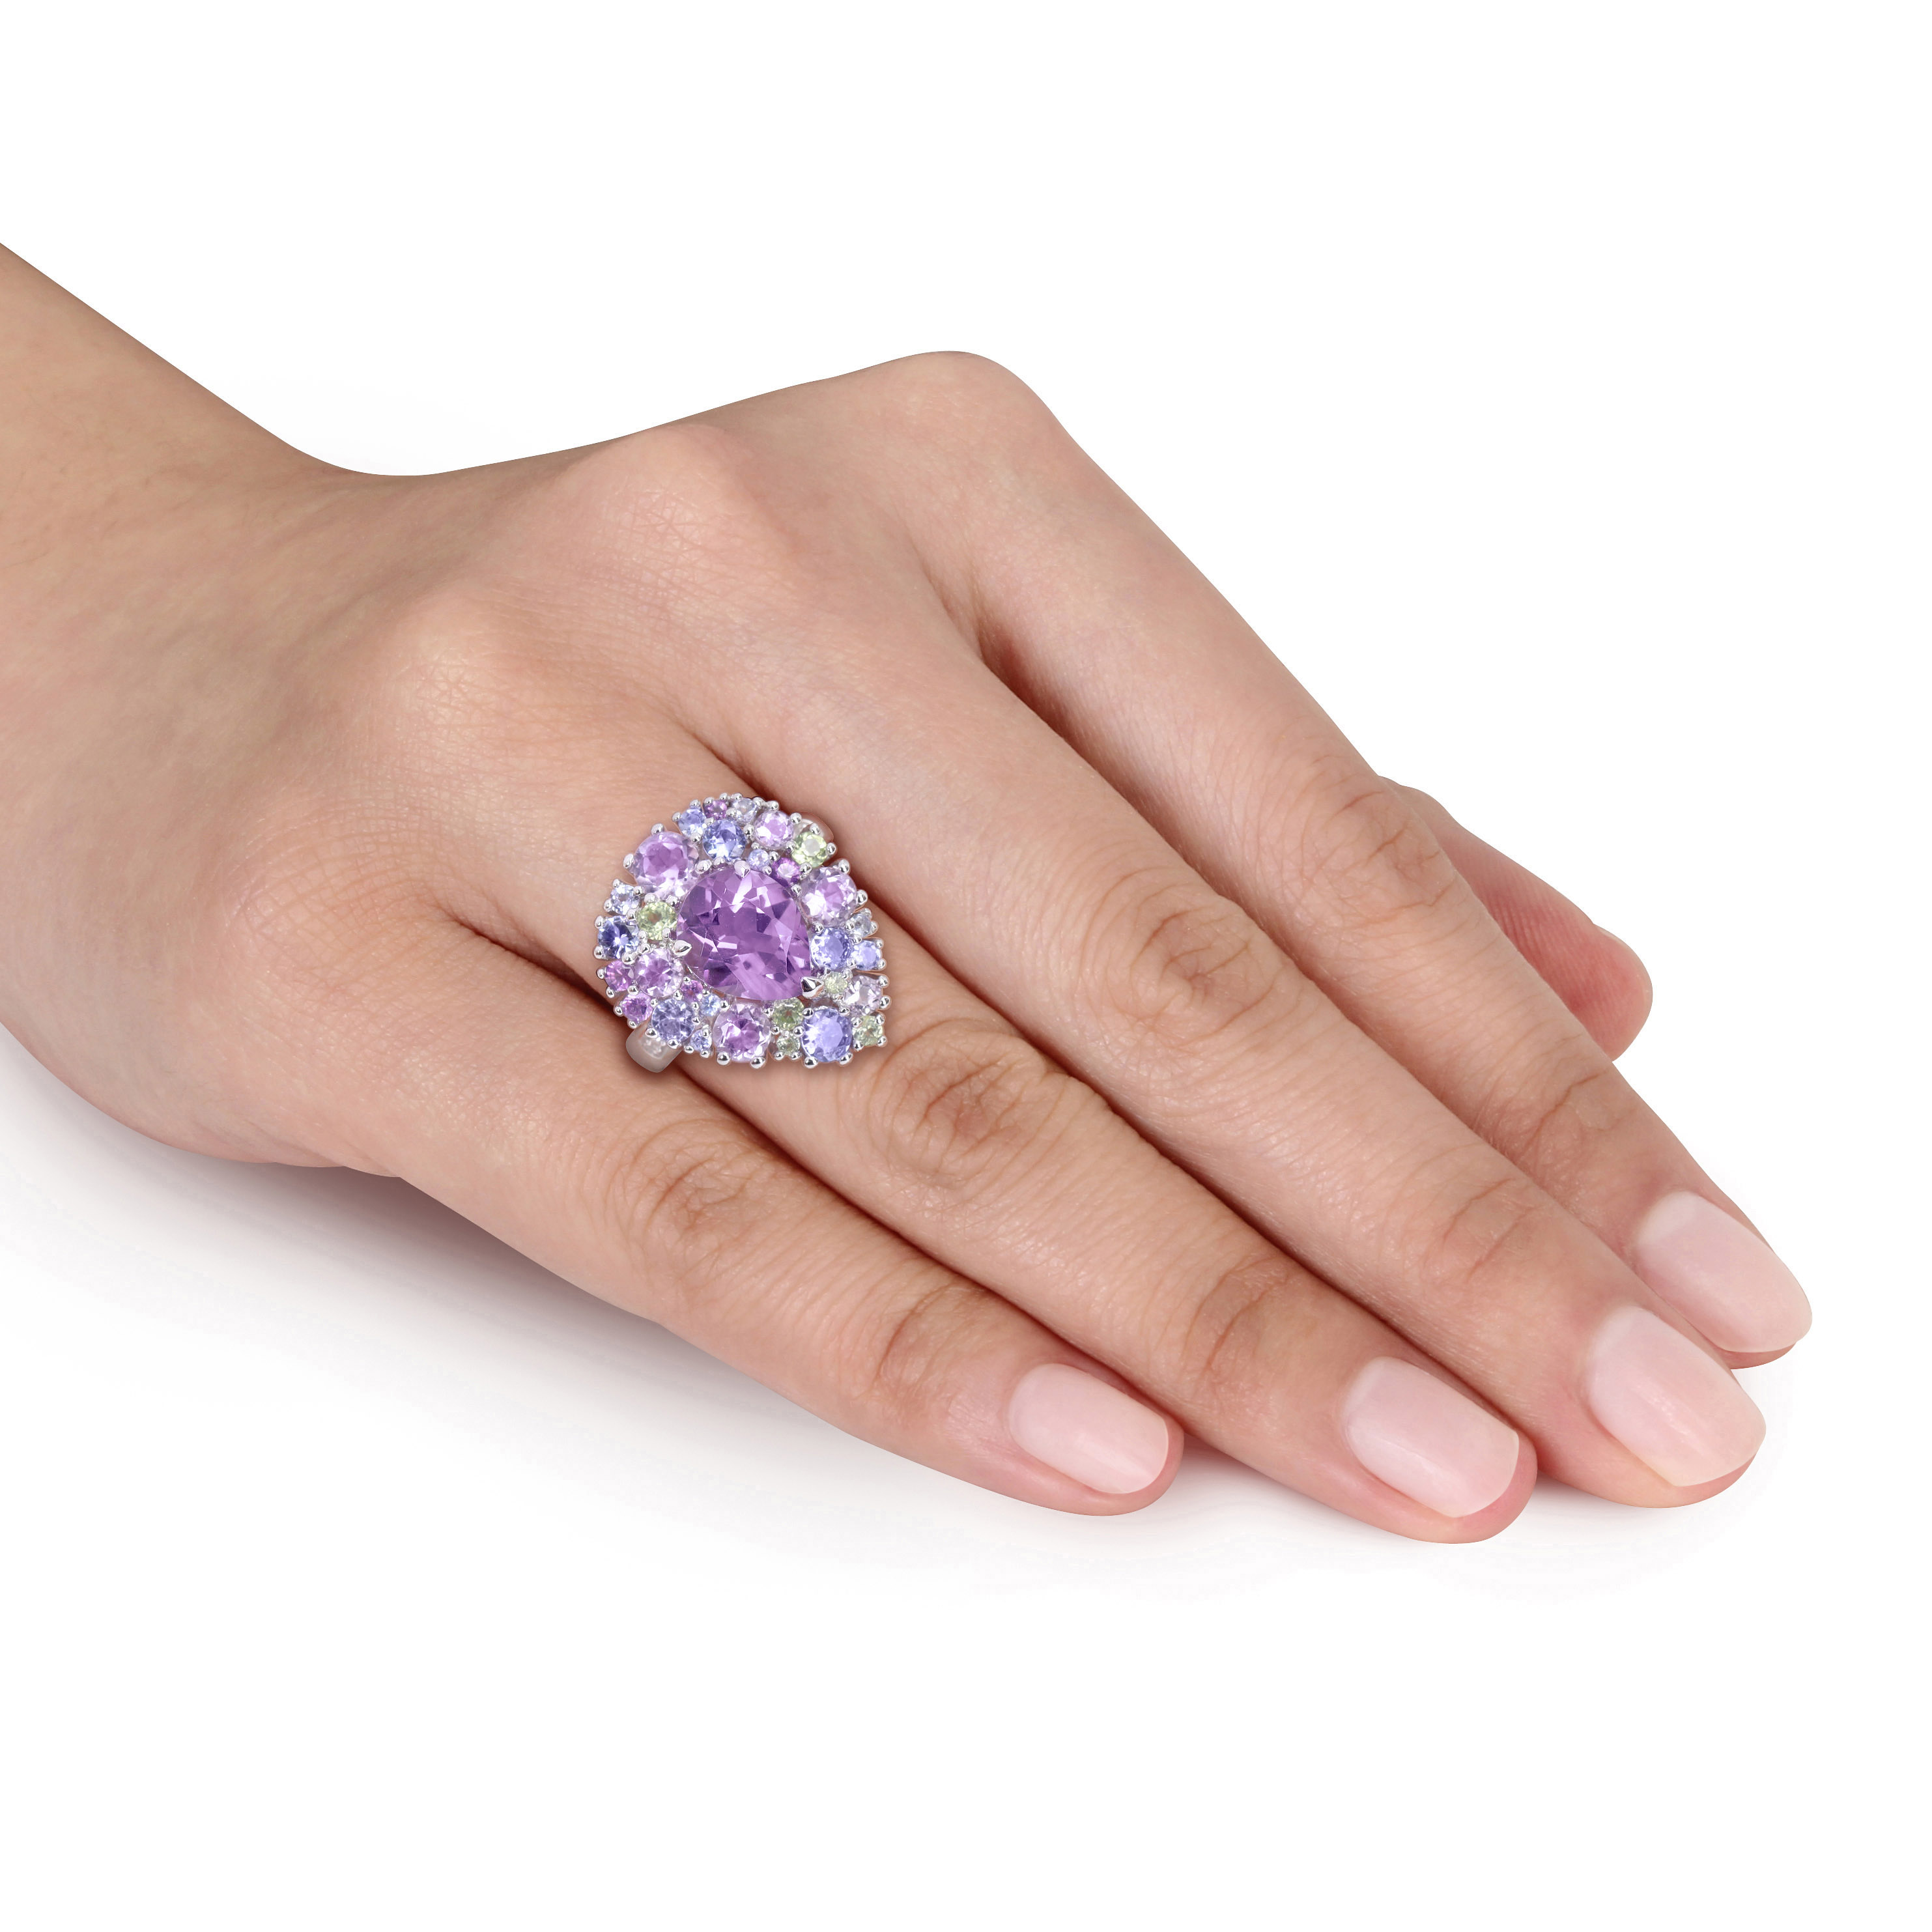 4 1/2 CT TGW Tanzanite, Rose de France, Peridot and Amethyst Pear-shape Cluster Cocktail Ring in Sterling Silver